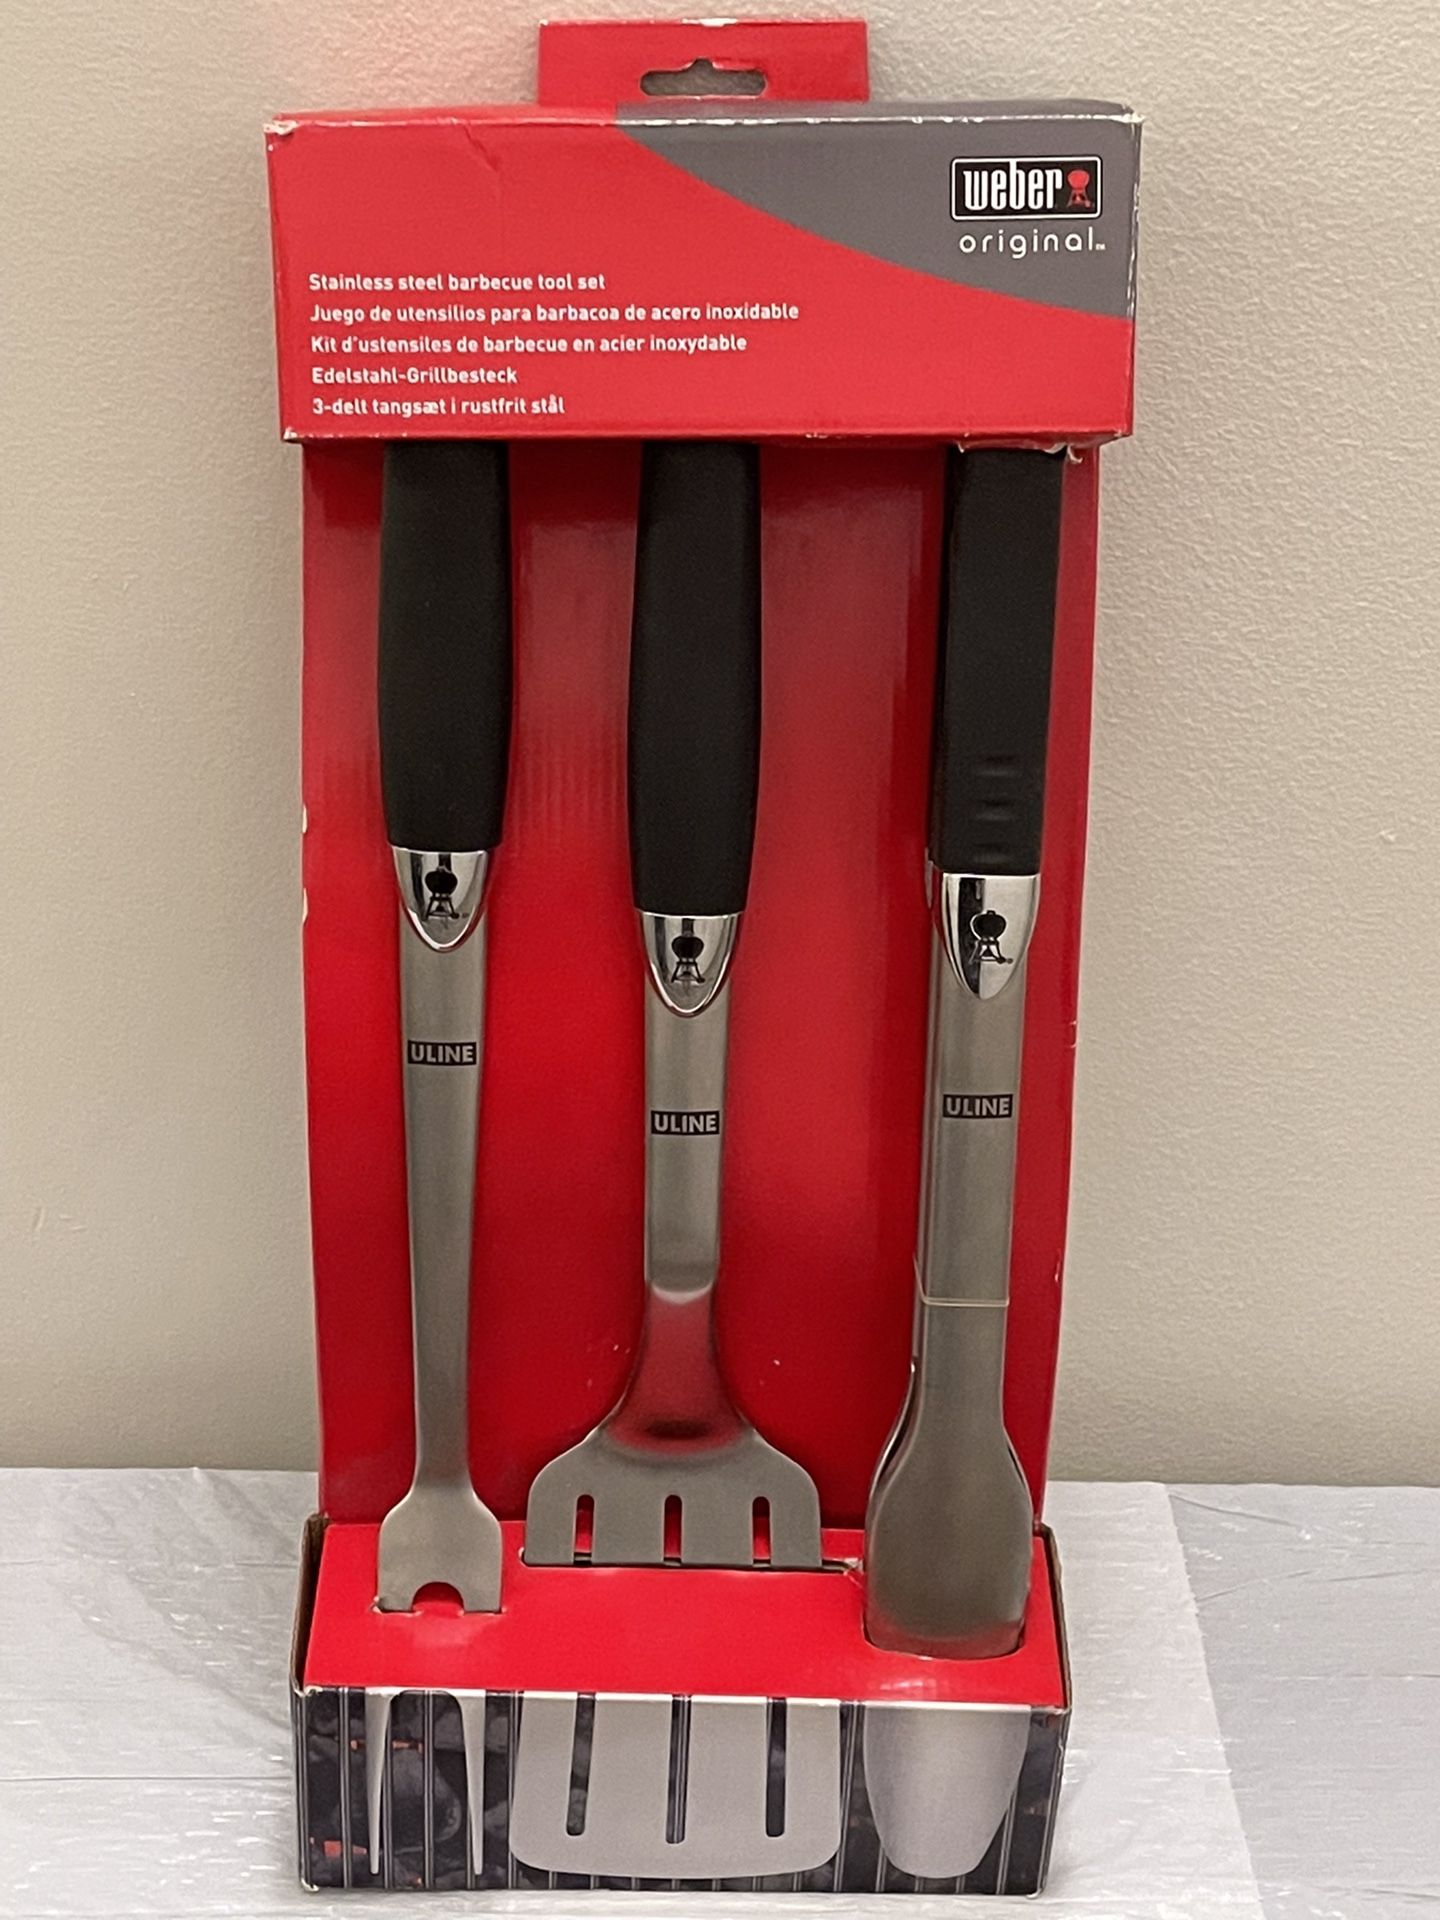 NEW!! WEBER 3-PIECE STAINLESS BARBECUE TOOL SET - firm price